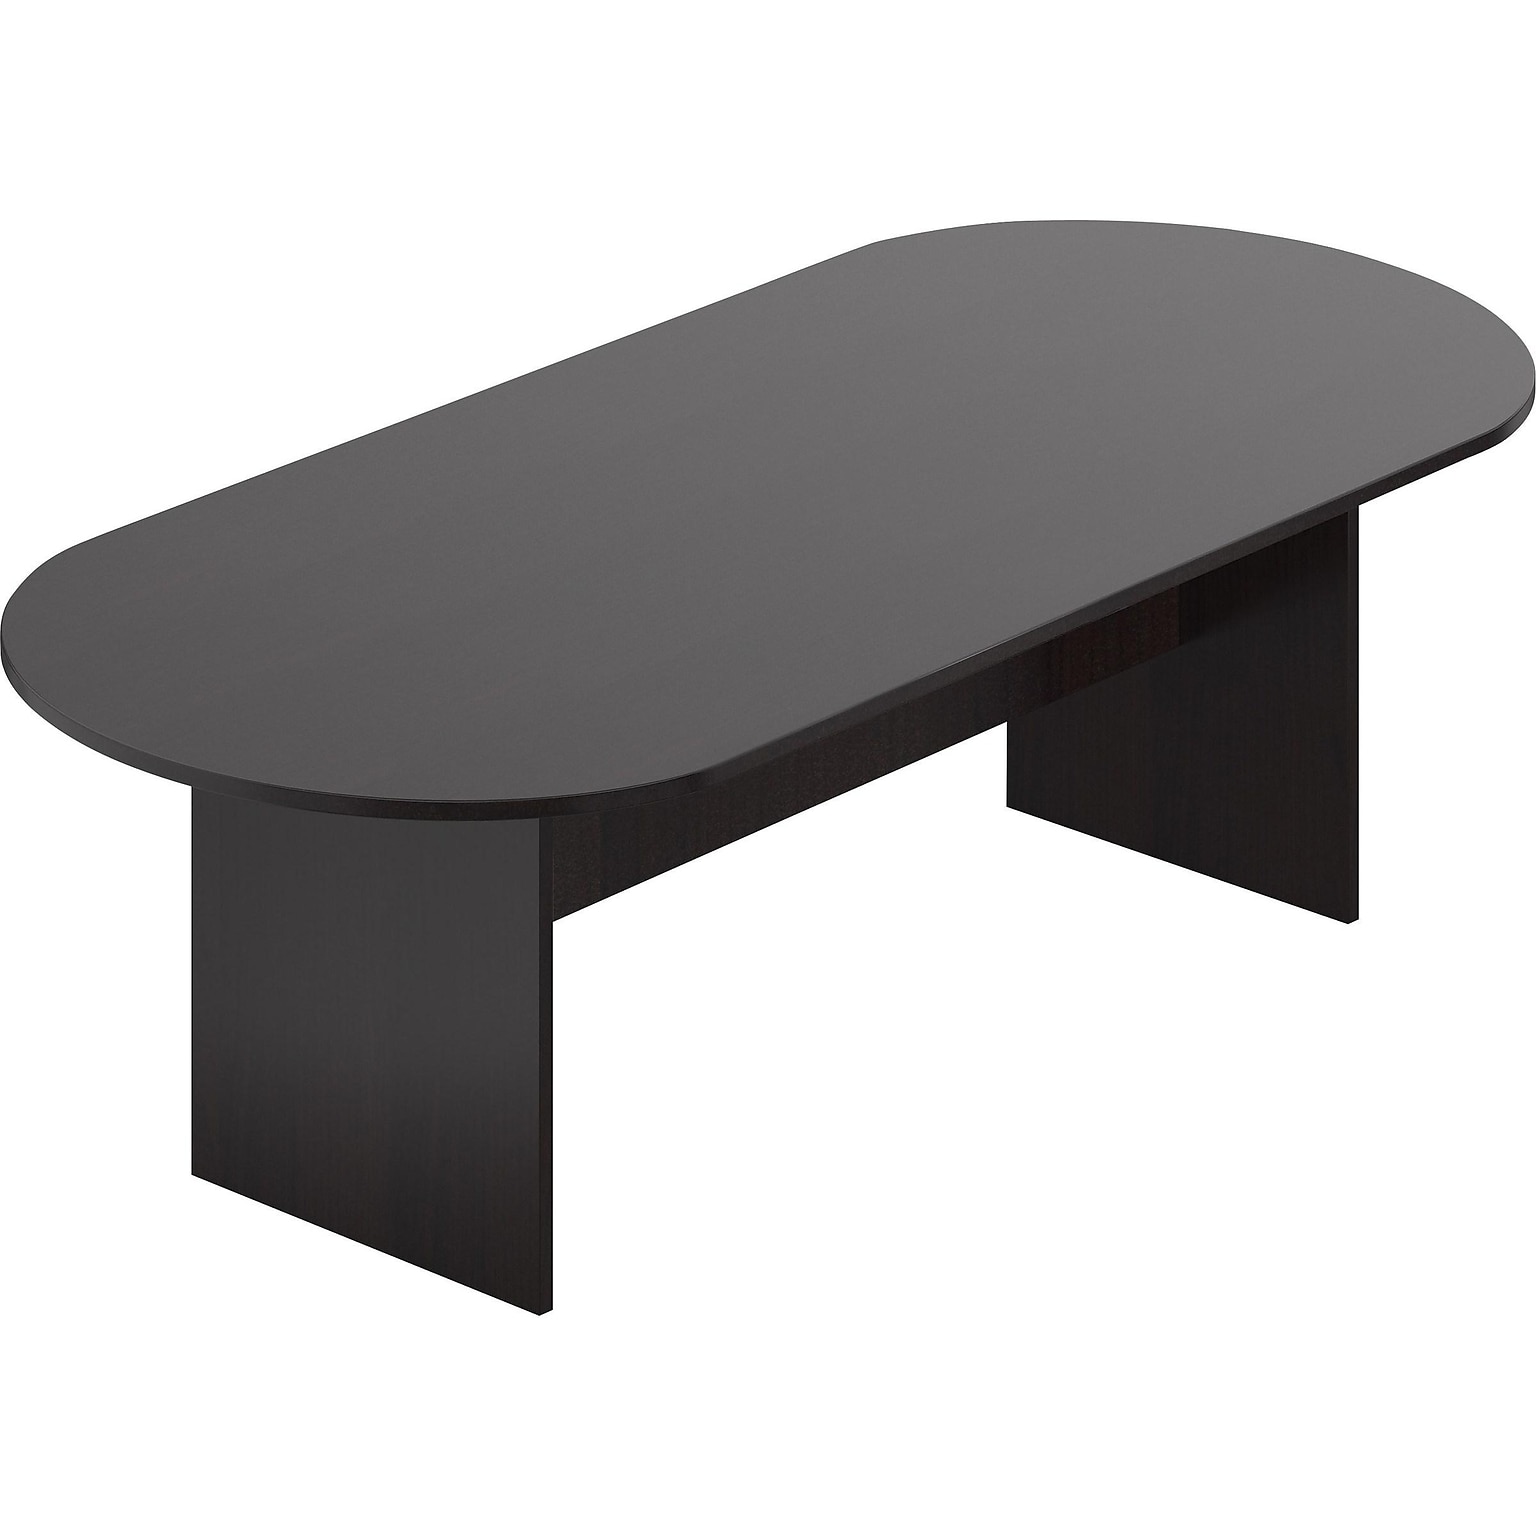 Offices To Go Superior Laminate Racetrack Conference Table, 29.5H x 95L x 44D, Espresso (SL9544RS-AEL)